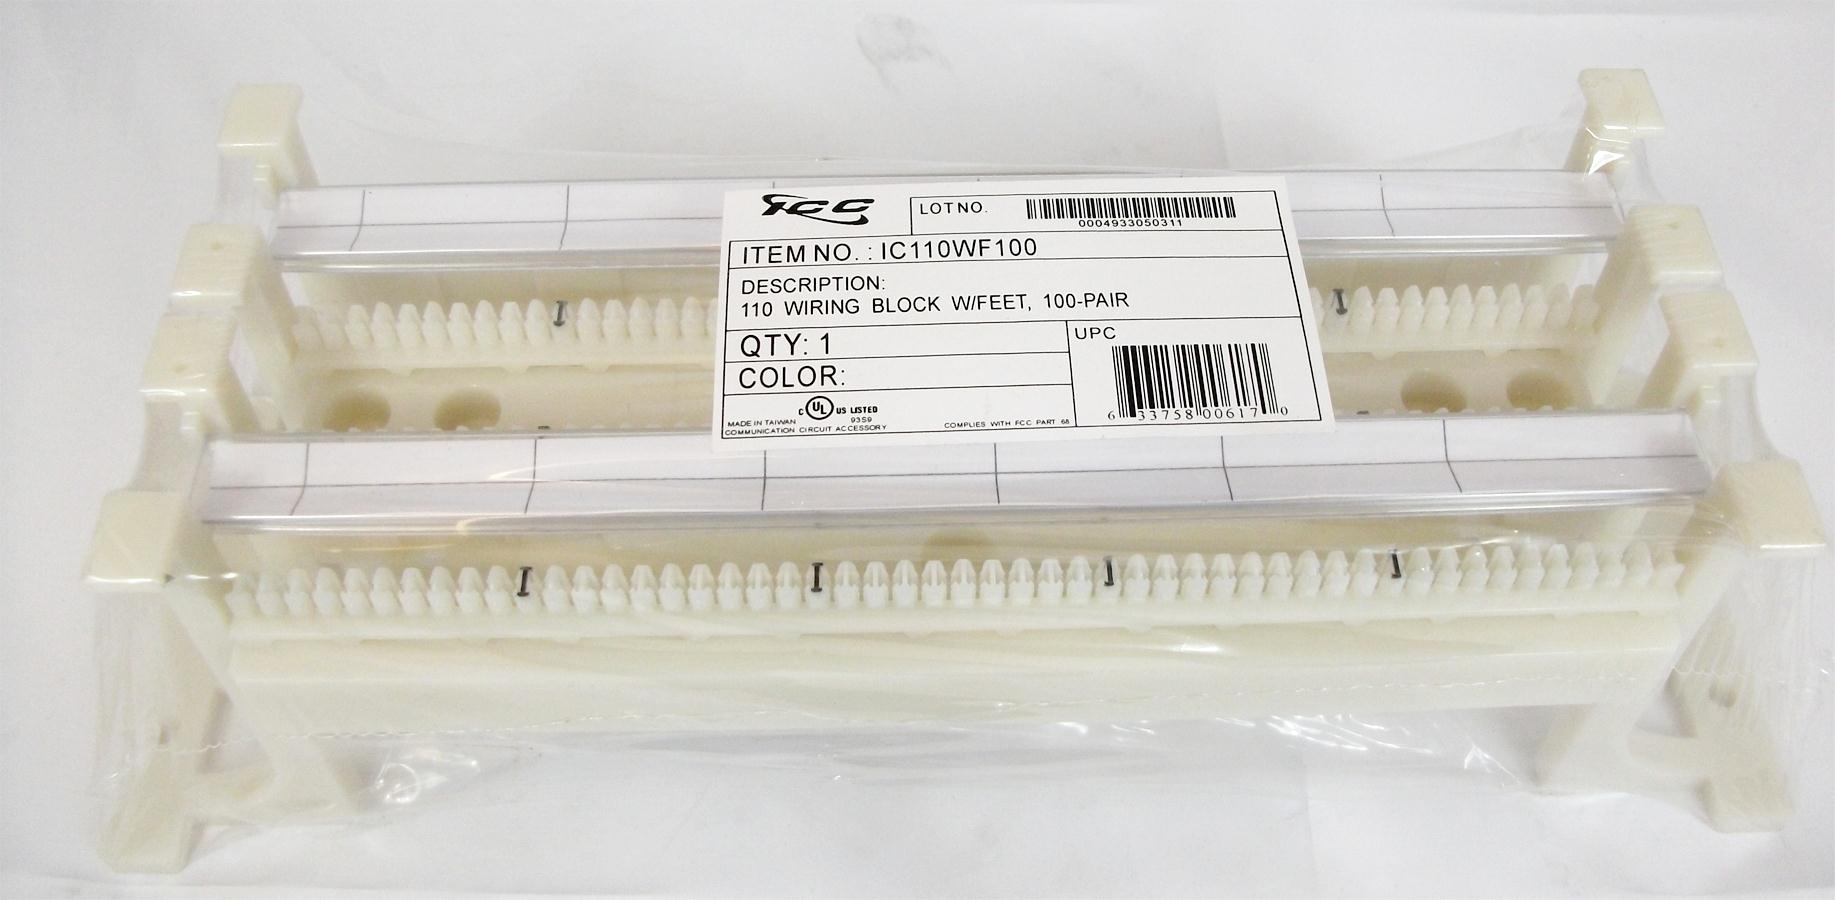 Cablesys-ICC-IC110WF100